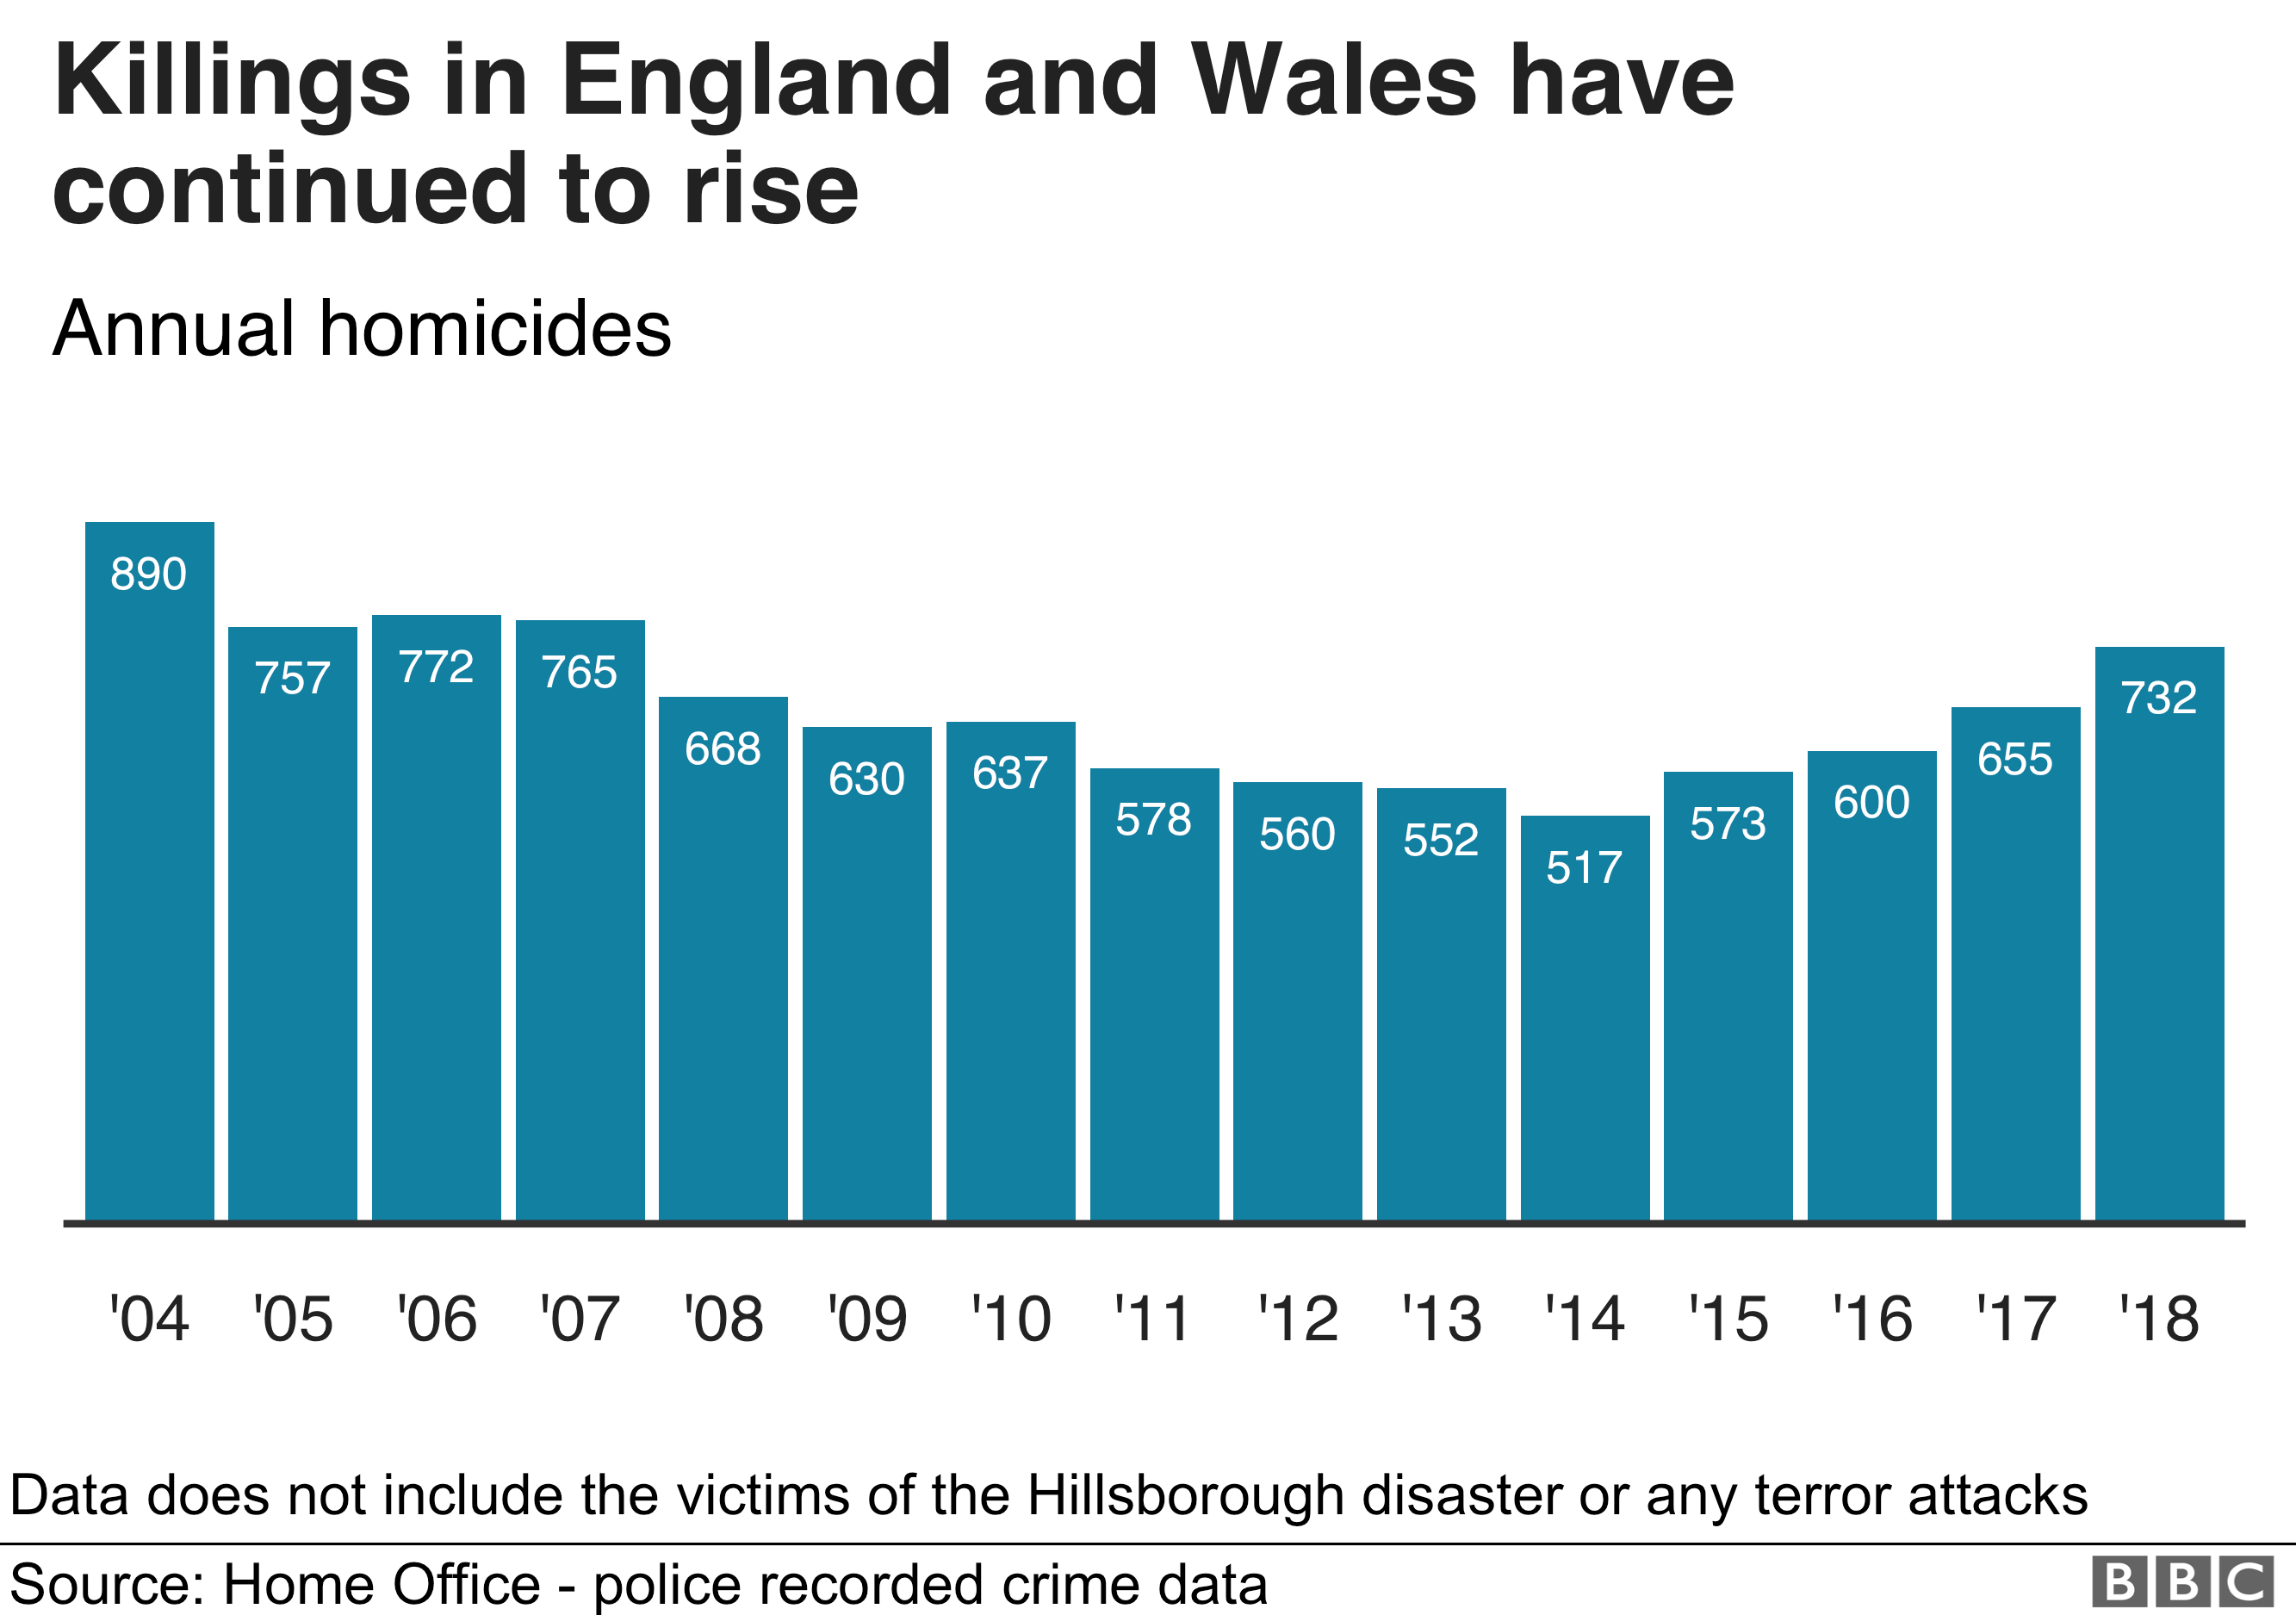 Chart showing homicide crime data